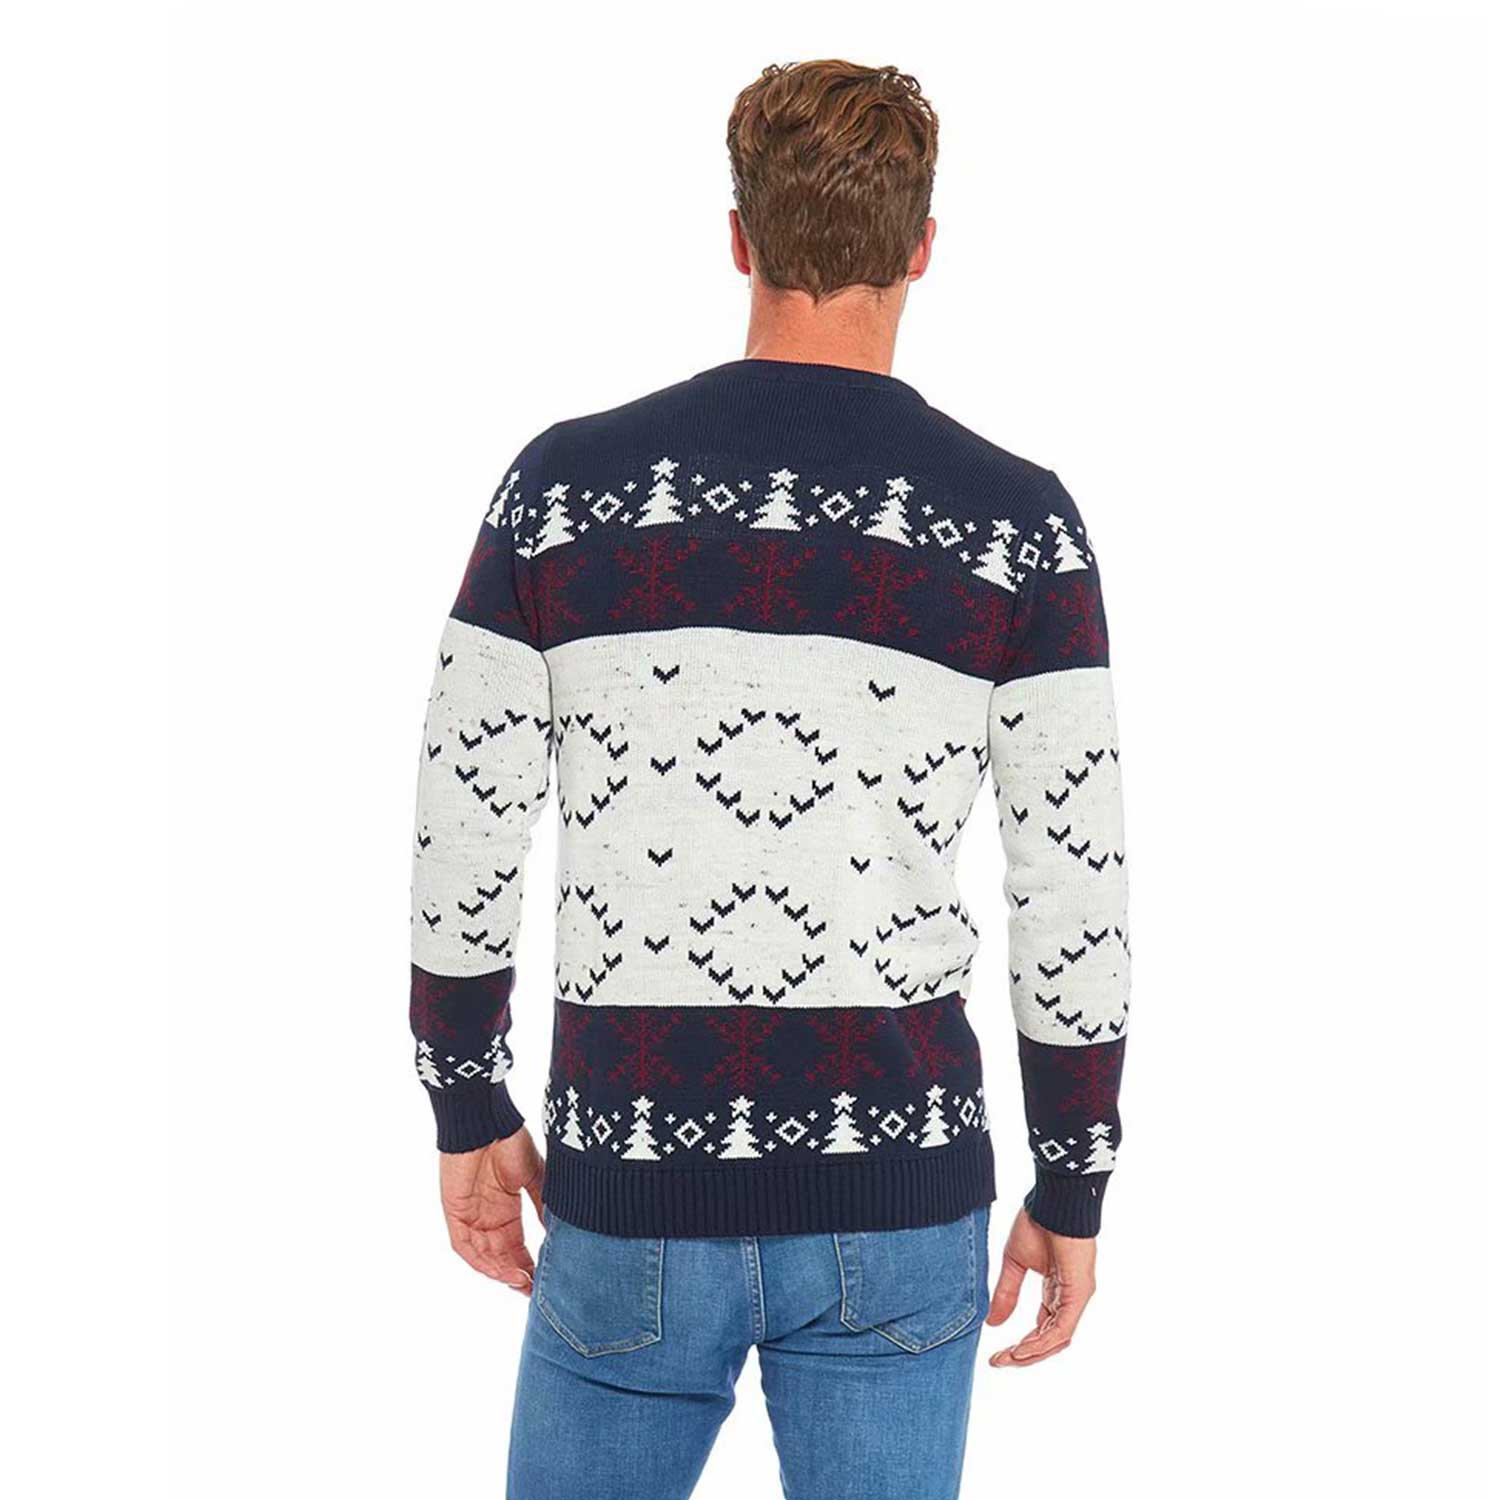 Classic Novelty Mens Ugly Christmas Sweater